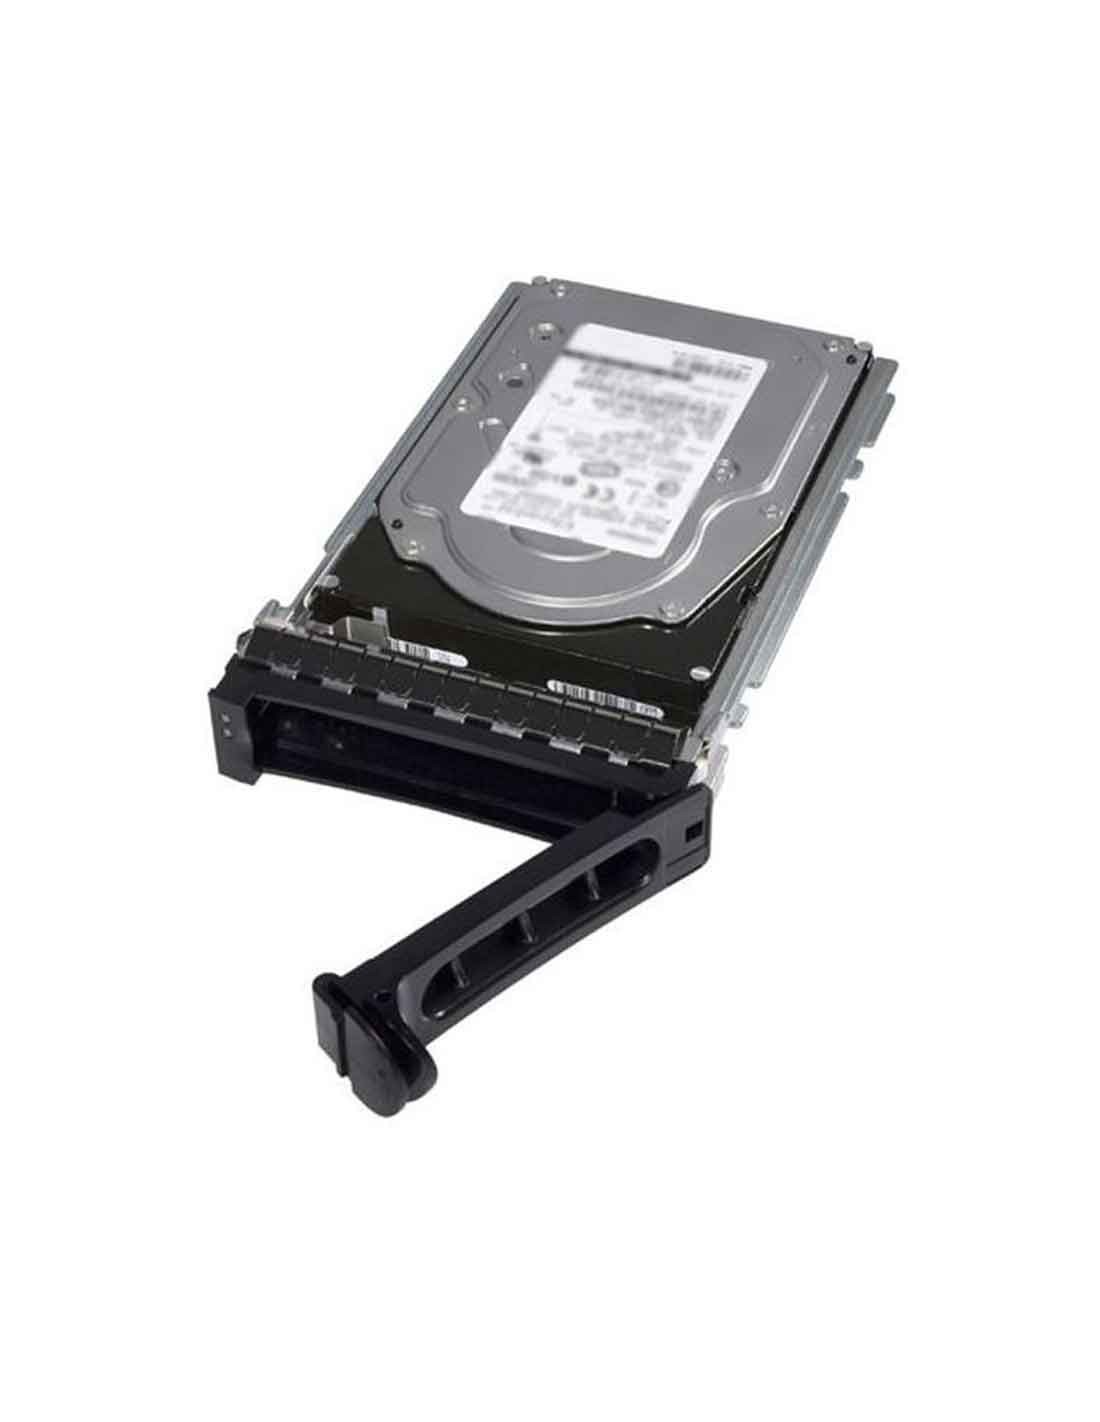 Dell 600GB 10K RPM SAS 12Gbps 2.5in Hot-plug drive at a cheap price in Dubai HDD qiymetleri